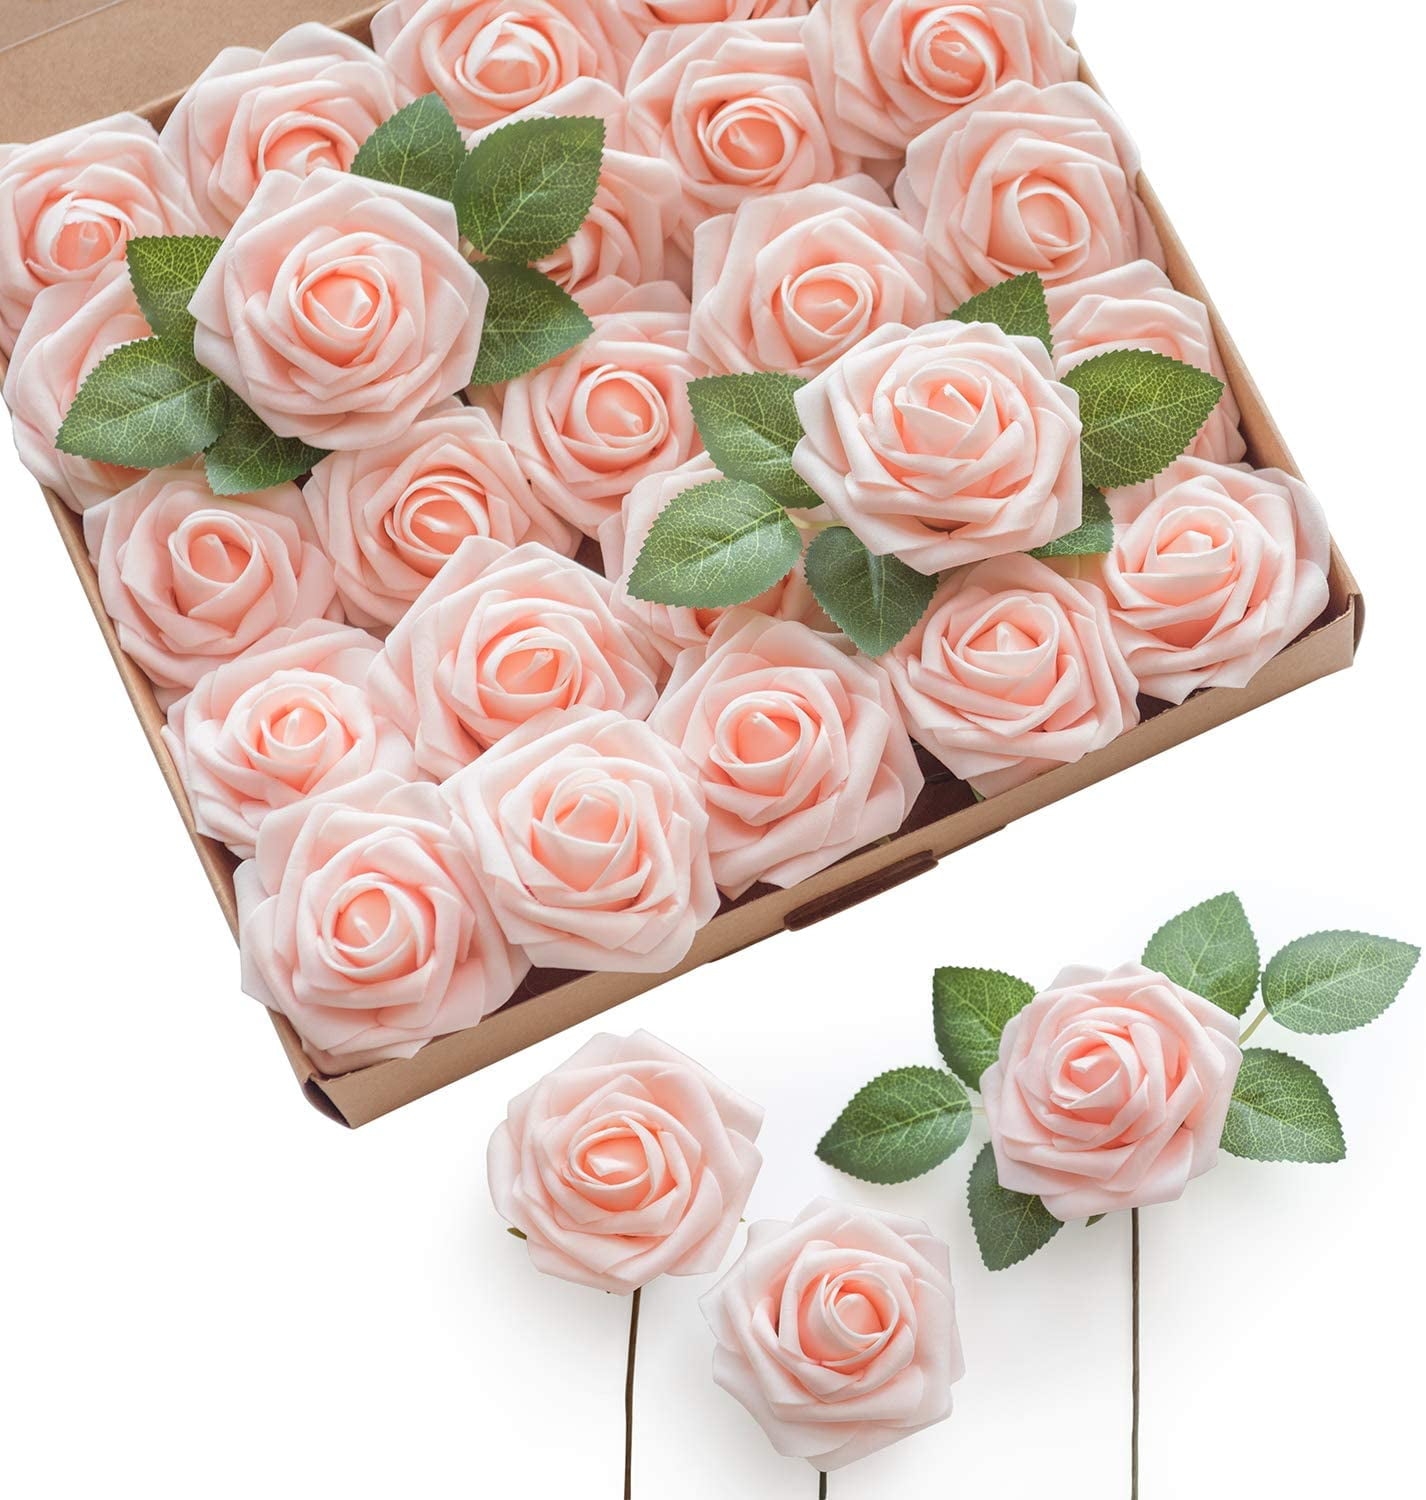 50pcs Artificial Flowers Rose Blush Real Looking Roses With Stem White 